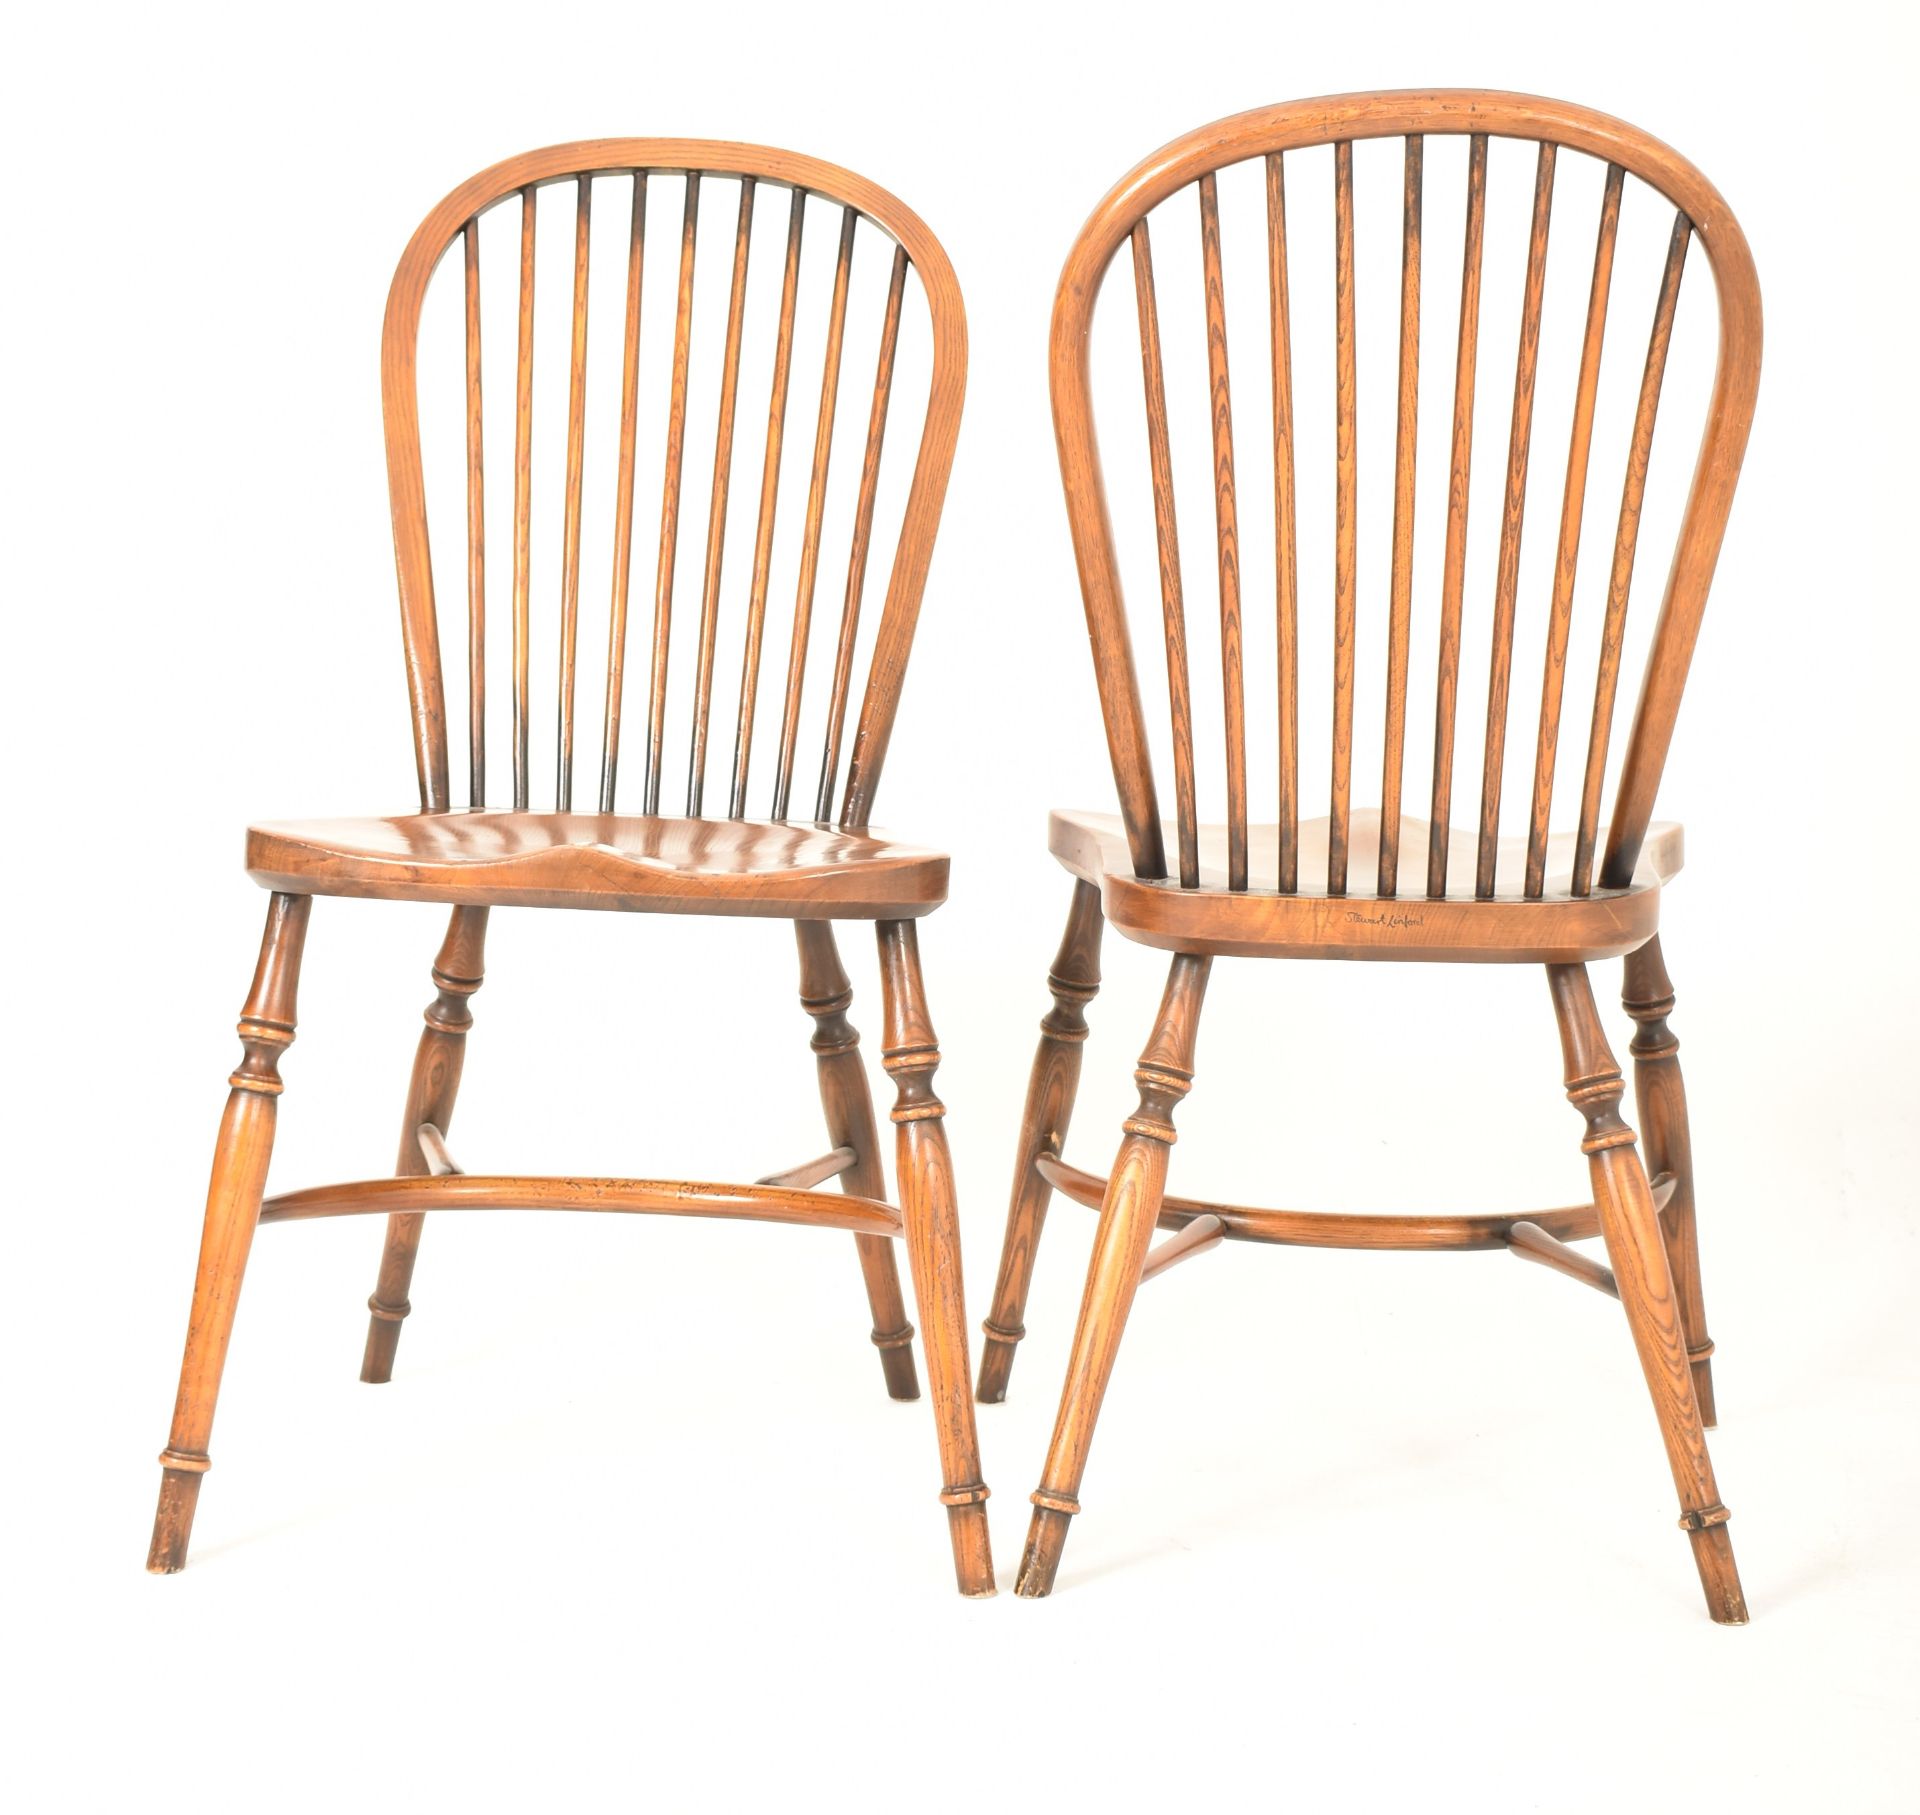 STEWART LINFORD FURNITURE - SIX WINDSOR STYLE STICK BACK CHAIRS - Image 2 of 8